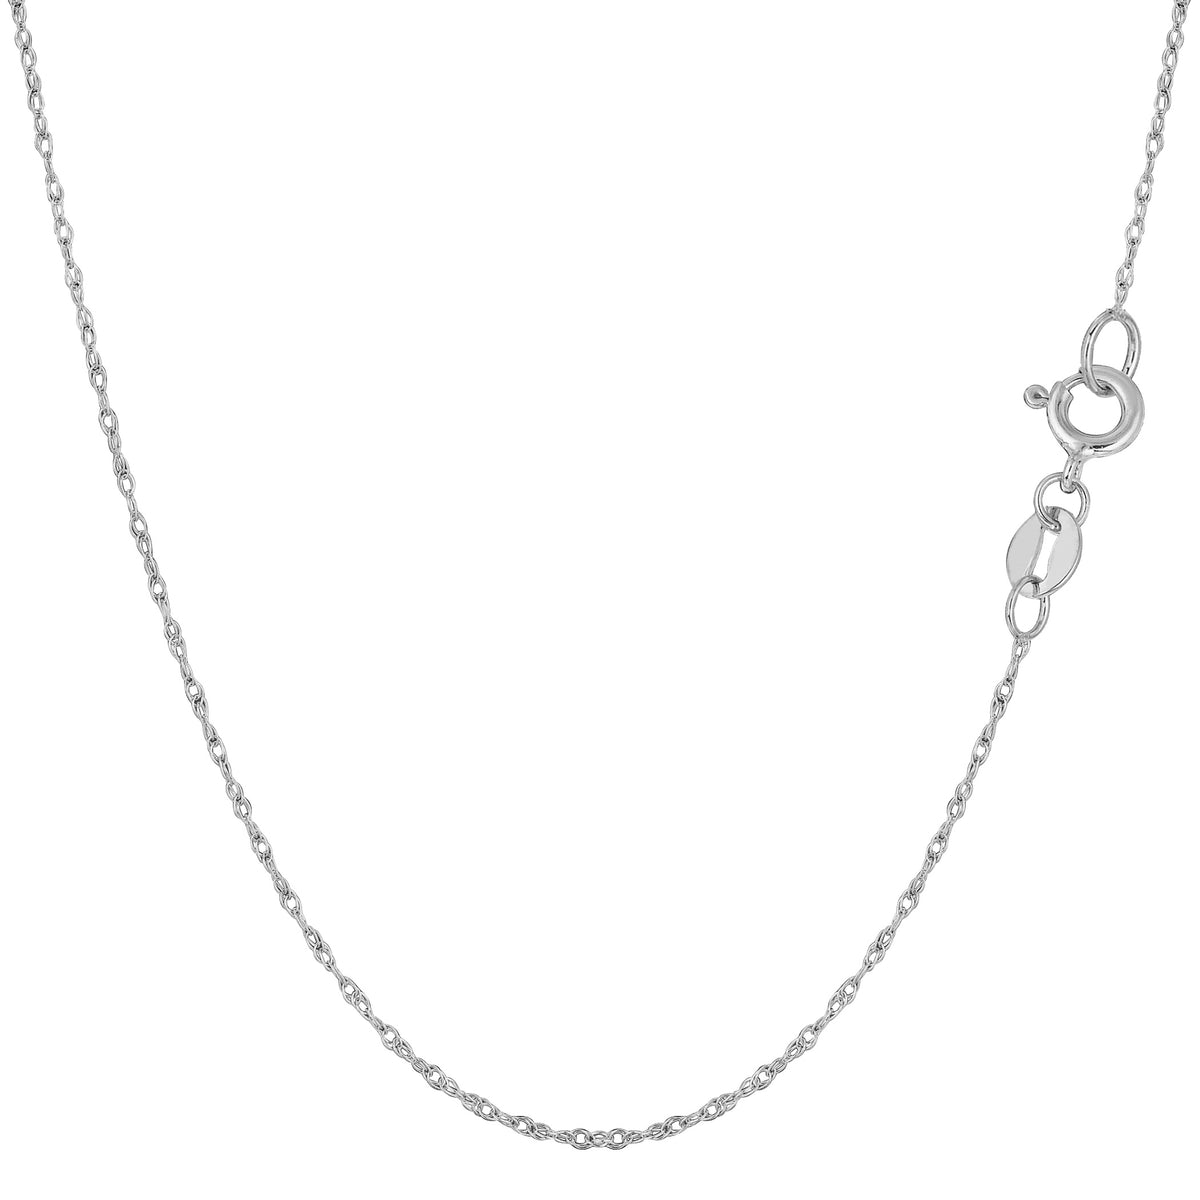 10k White Gold Rope Chain Necklace, 0.6mm fine designer jewelry for men and women